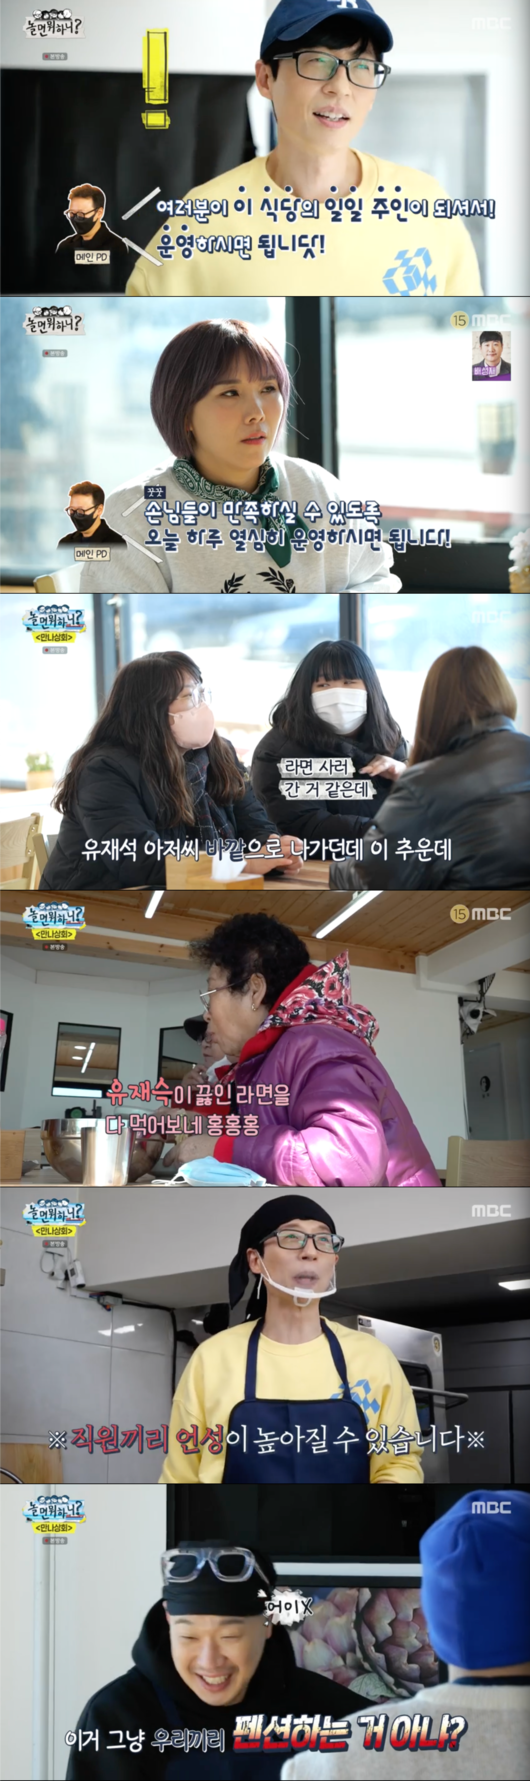 The members of Hangout with Yo suddenly became the owner of a store in Gangwon Province, South Korea Yang Yang.Its a familiar entry painting somewhere.On MBC Hangout with Yo broadcasted on the 5th, Yoo Jae-Suk, Jin Jun-ha, Haha, Shin Bong-sun met at a sushi restaurant in Gangwon Province, South Korea Yang Yang.The members repeatedly expressed their admiration because of the sea view that cannot be seen in Seoul. They expected breakfast early in the morning, but somehow the store president was not seen.But the phone began to ring in the empty store.Yoo Jae-Suk received a call and Park Chang-hoon PD over the receiver explained, Today, you can become the daily owner of this restaurant and operate it.Yoo Jae-Suk, Haha, Jin Jun-ha and Shin Bong-sun, who subtracted the self-contained Americas with the confirmation of Corona 19, suddenly became the owners of the sushi restaurant.The main chef was Shin Bong-sun, the hall captain was Jeong Jun-ha, the ramen manager was Yoo Jae-Suk, and the shopping manager was Haha.Haha went to the order market to buy seafood and Shin Bong-sun and Yoo Jae-Suk tested the menu to sell.Shin Bong-sun decided to cook kimchi stew and squid pajeon, and Yoo Jae-Suk decided to cook ramen, but suddenly guests came in before opening at 11 am.A six-member large family guest tried to order kimchi stew, but he told me that he could not cook rice.Shin Bong-sun, Yoo Jae-Suk and Jin Jung-ha were the first orders, but they boiled ramen noodles safely.The grandmas guest table also ate Yoo Jae-Suks ramen and praised Yoo Jae-Suks boiled ramen is the best.The two male guests from Namyangju enjoyed the kimchi stew and squid soup made by Shin Bong-sun.A family of four living in Yang Yang also had happy memories of eating ramen and squid.Although the members of Hahas horns ate and did not receive guests looking for a sashimi or a sashimi, the original president finished the day Vic-Fezensac to the satisfaction of the original president.Yoo Jae-Suk said, Vic-Fezensac seems not to be able to do anything really.It was too hard even though there were not so many guests, he said, giving generous support to small business owners who were having a hard time in Coronas 19th city.It was a warm-hearted broadcast, but the laughter was missing. Suddenly, the setting of members operating a restaurant and selling food is also a picture that was commonly seen on TVN Gang Restaurant and How the President.Coffee, ramen, etc., were more frequent times.Hangout with Yo, who has made a change since Kim Tae-ho PD left, is struggling, but the way to go seems far away.What do you do when you play?